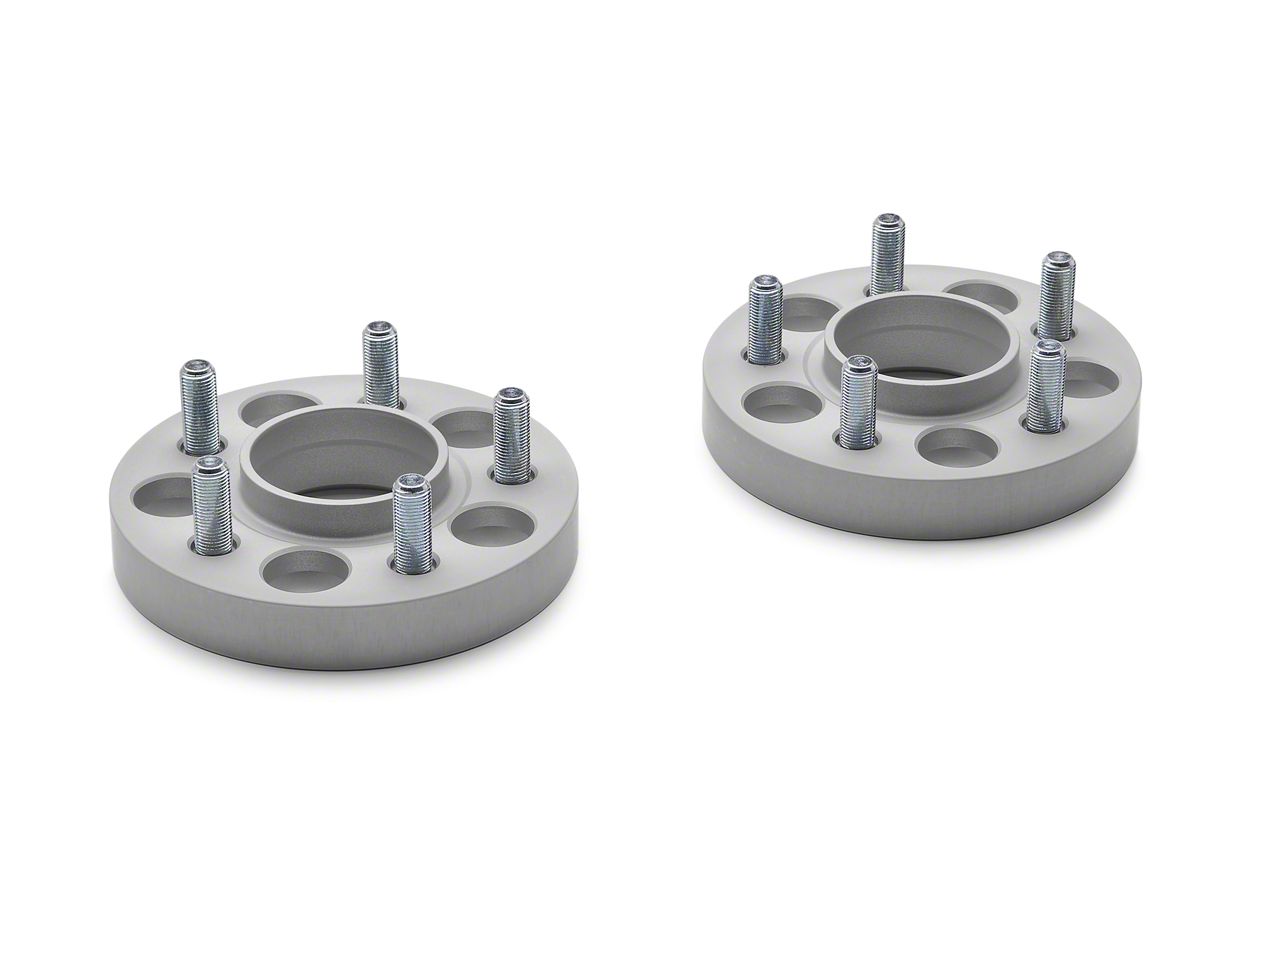 2 Pc Fits 1994-2014 Mustang Billet Wheel Spacers 1.00 Inch 1/2 Studs # 5450A1/2 